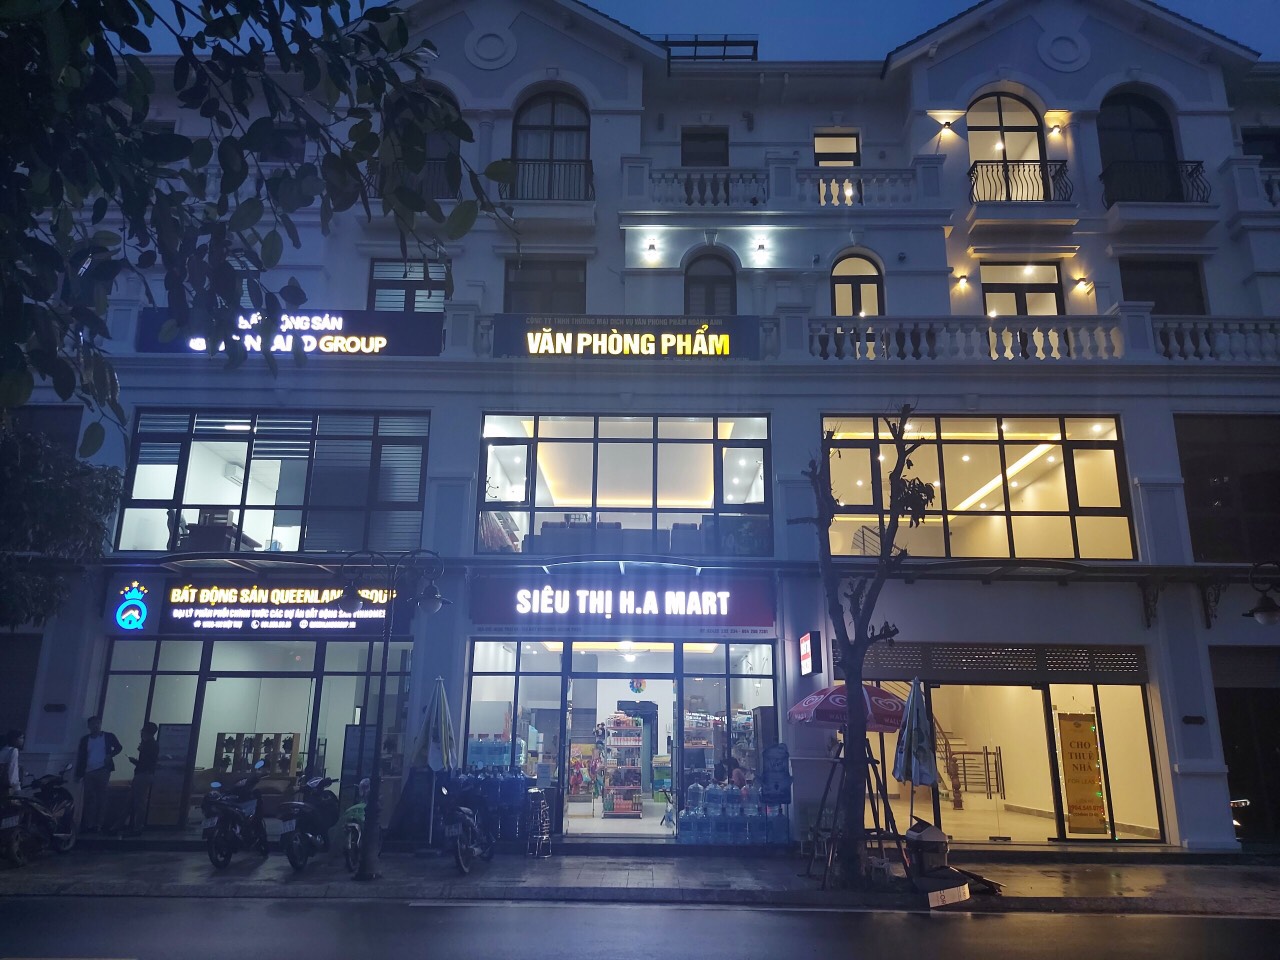 Buying a quite alluring Shophouse in Ngoc Trai Subdivision at an affordable price